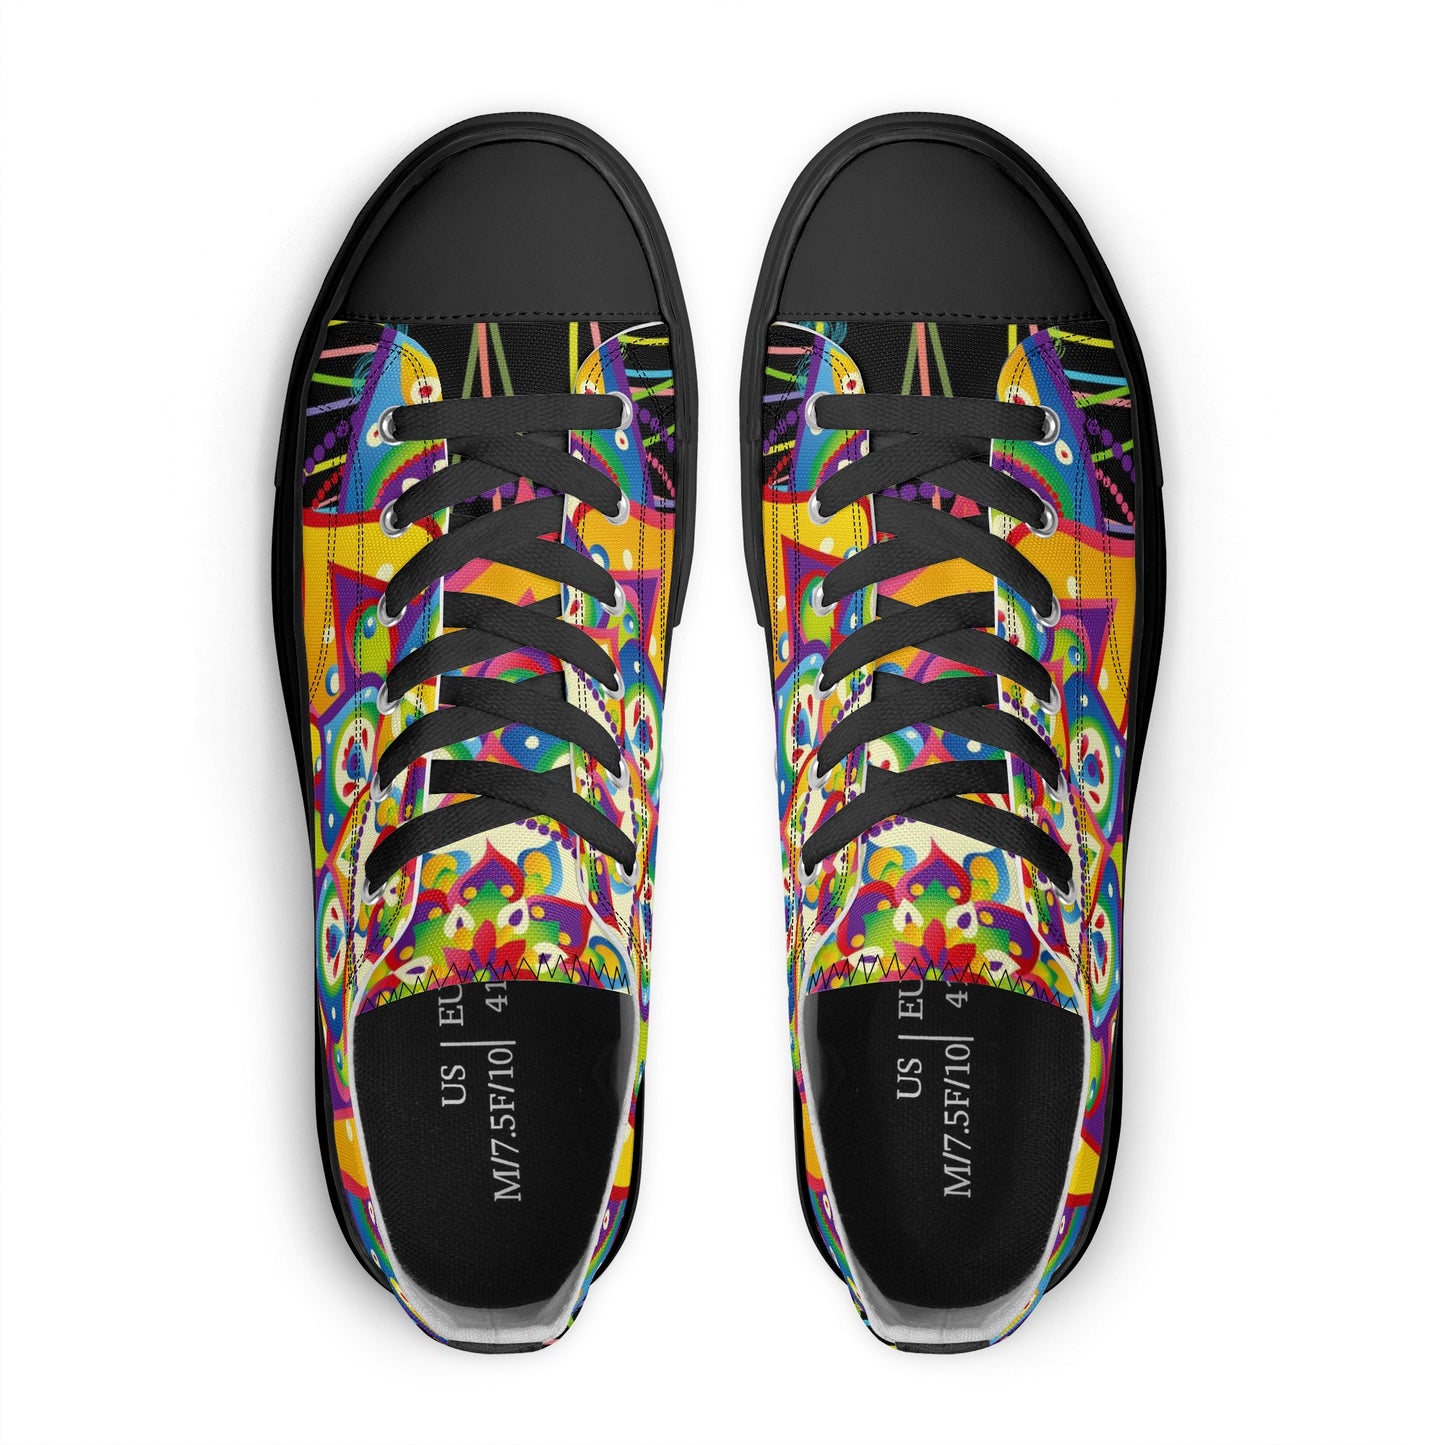 Mandala Pattern - Womens Classic Low Top Canvas Shoes for Footwear Lovers